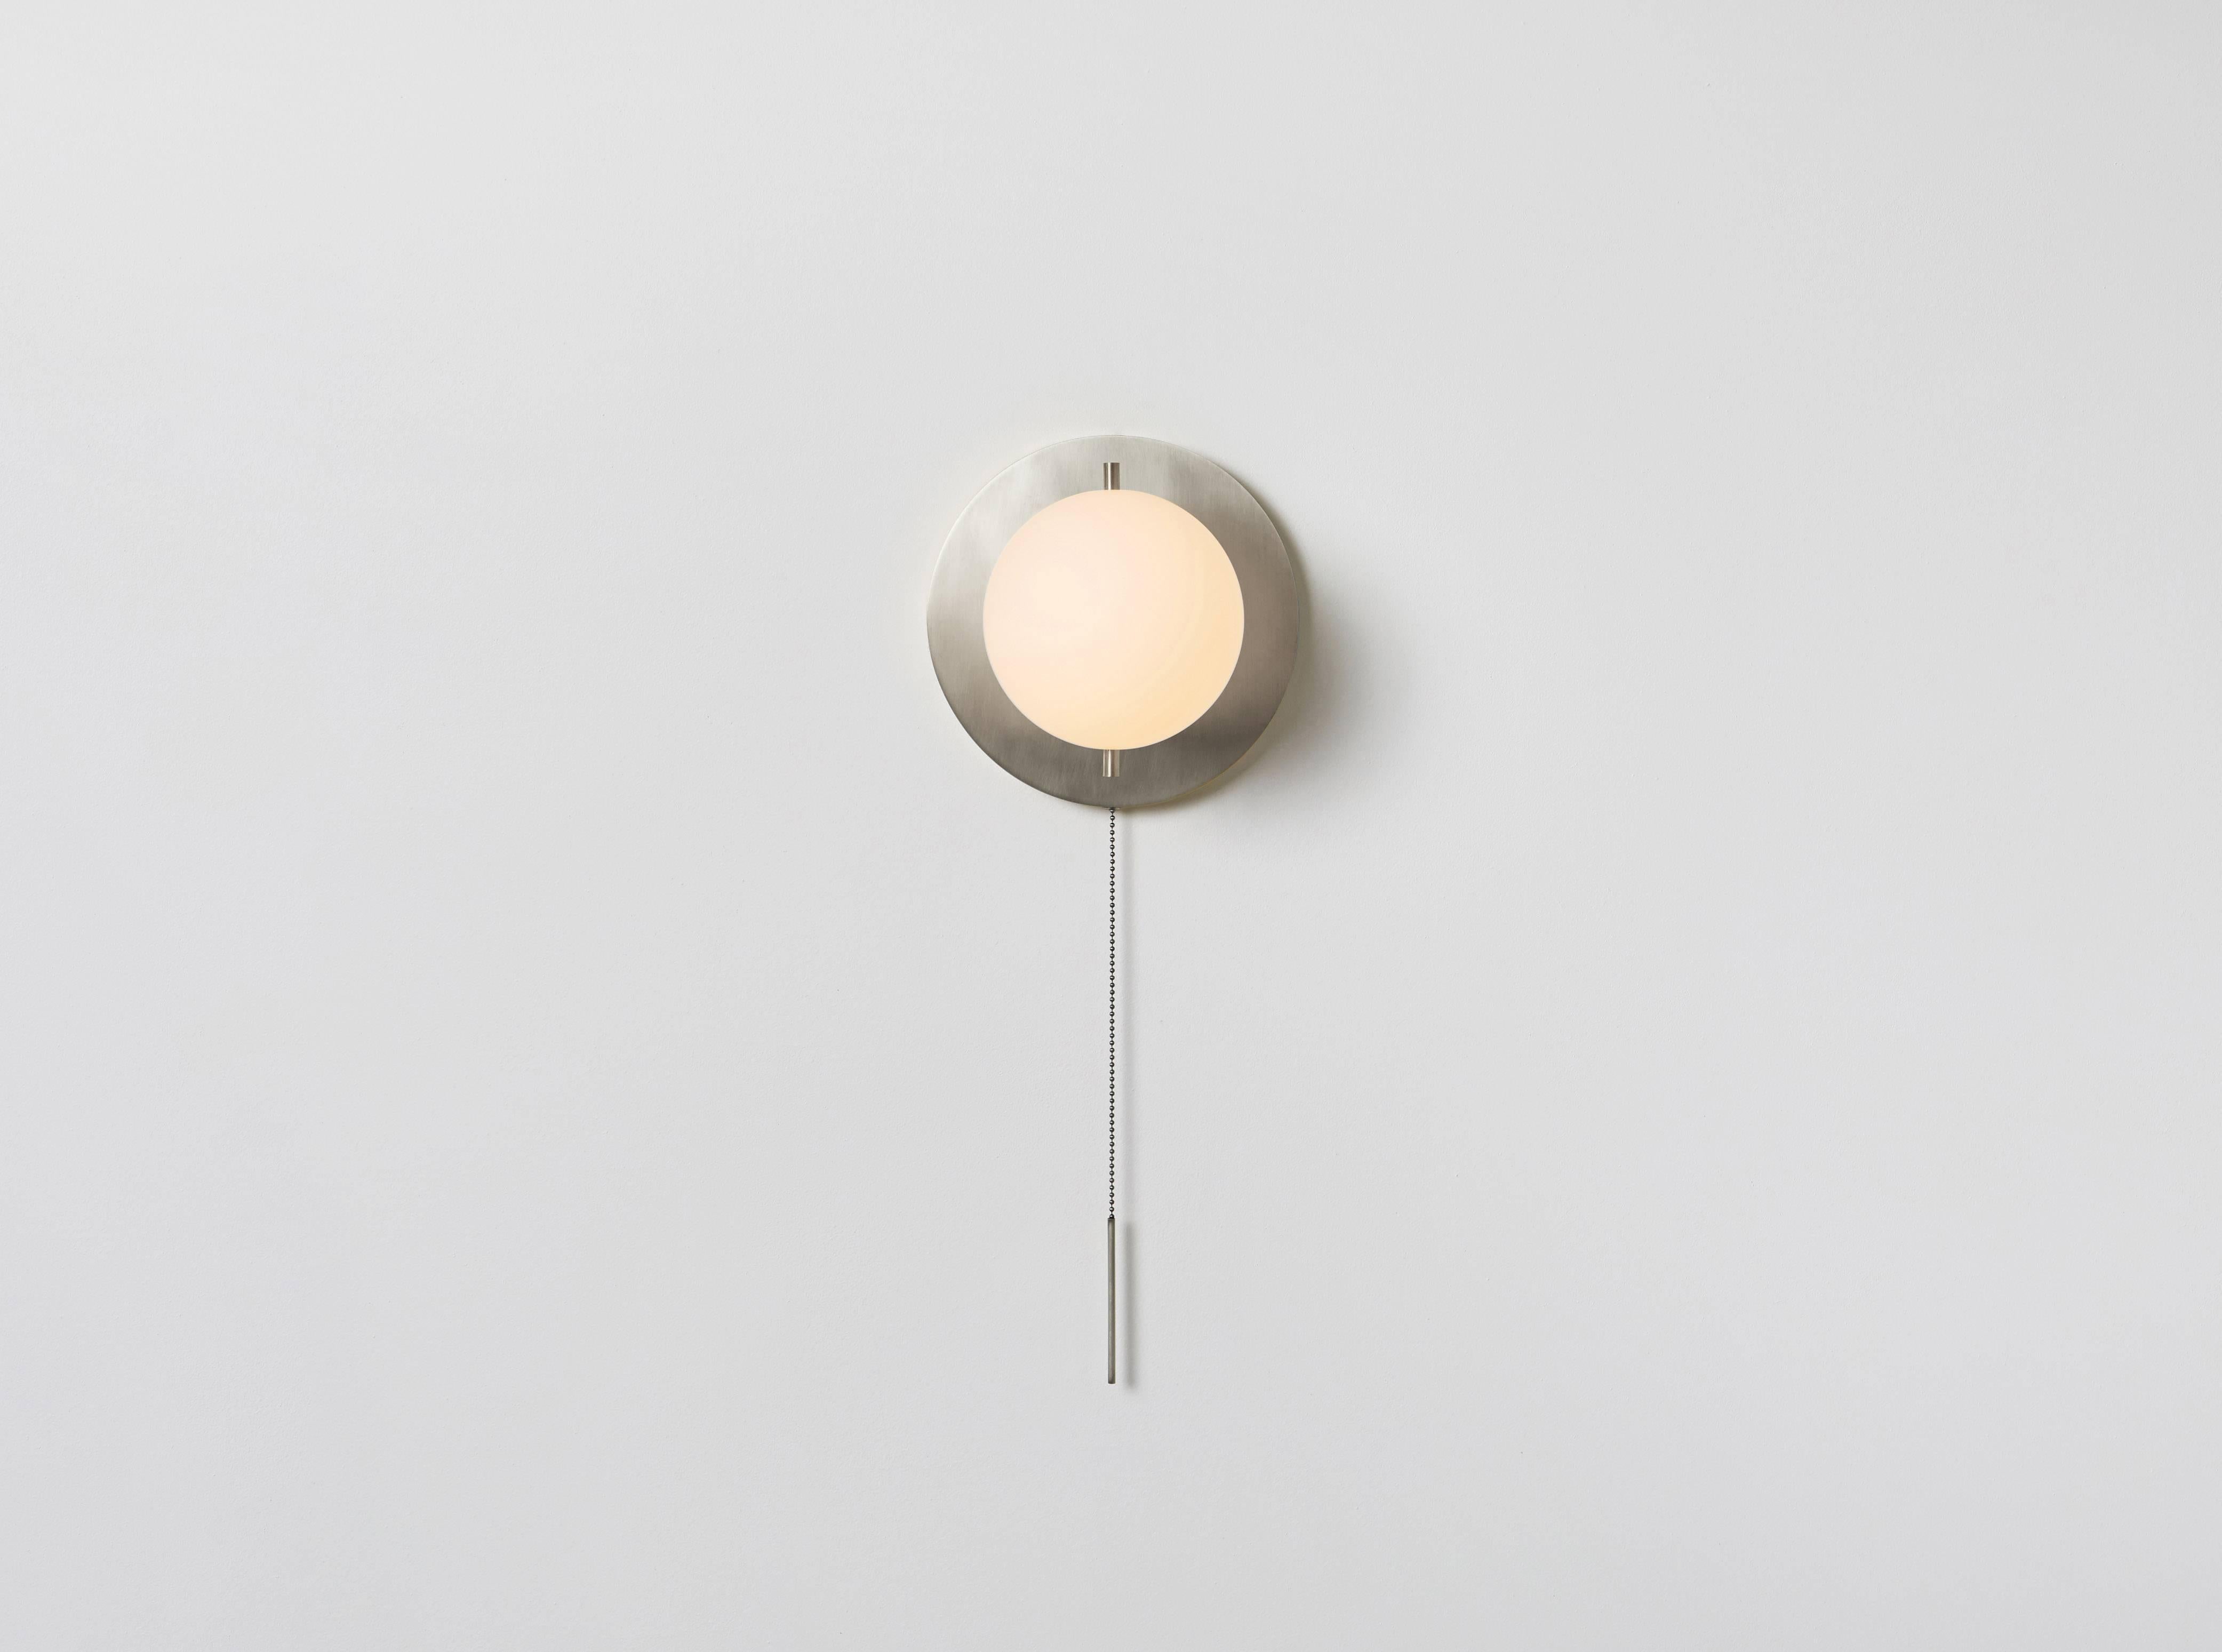 The Signal sconce features a glass globe. The fixture is delicately mounted between two metal pins against a luminous canopy, creating a hieroglyphic composition. A pull chain holds a slender rod, giving the piece a jewel-like presence. Made in the